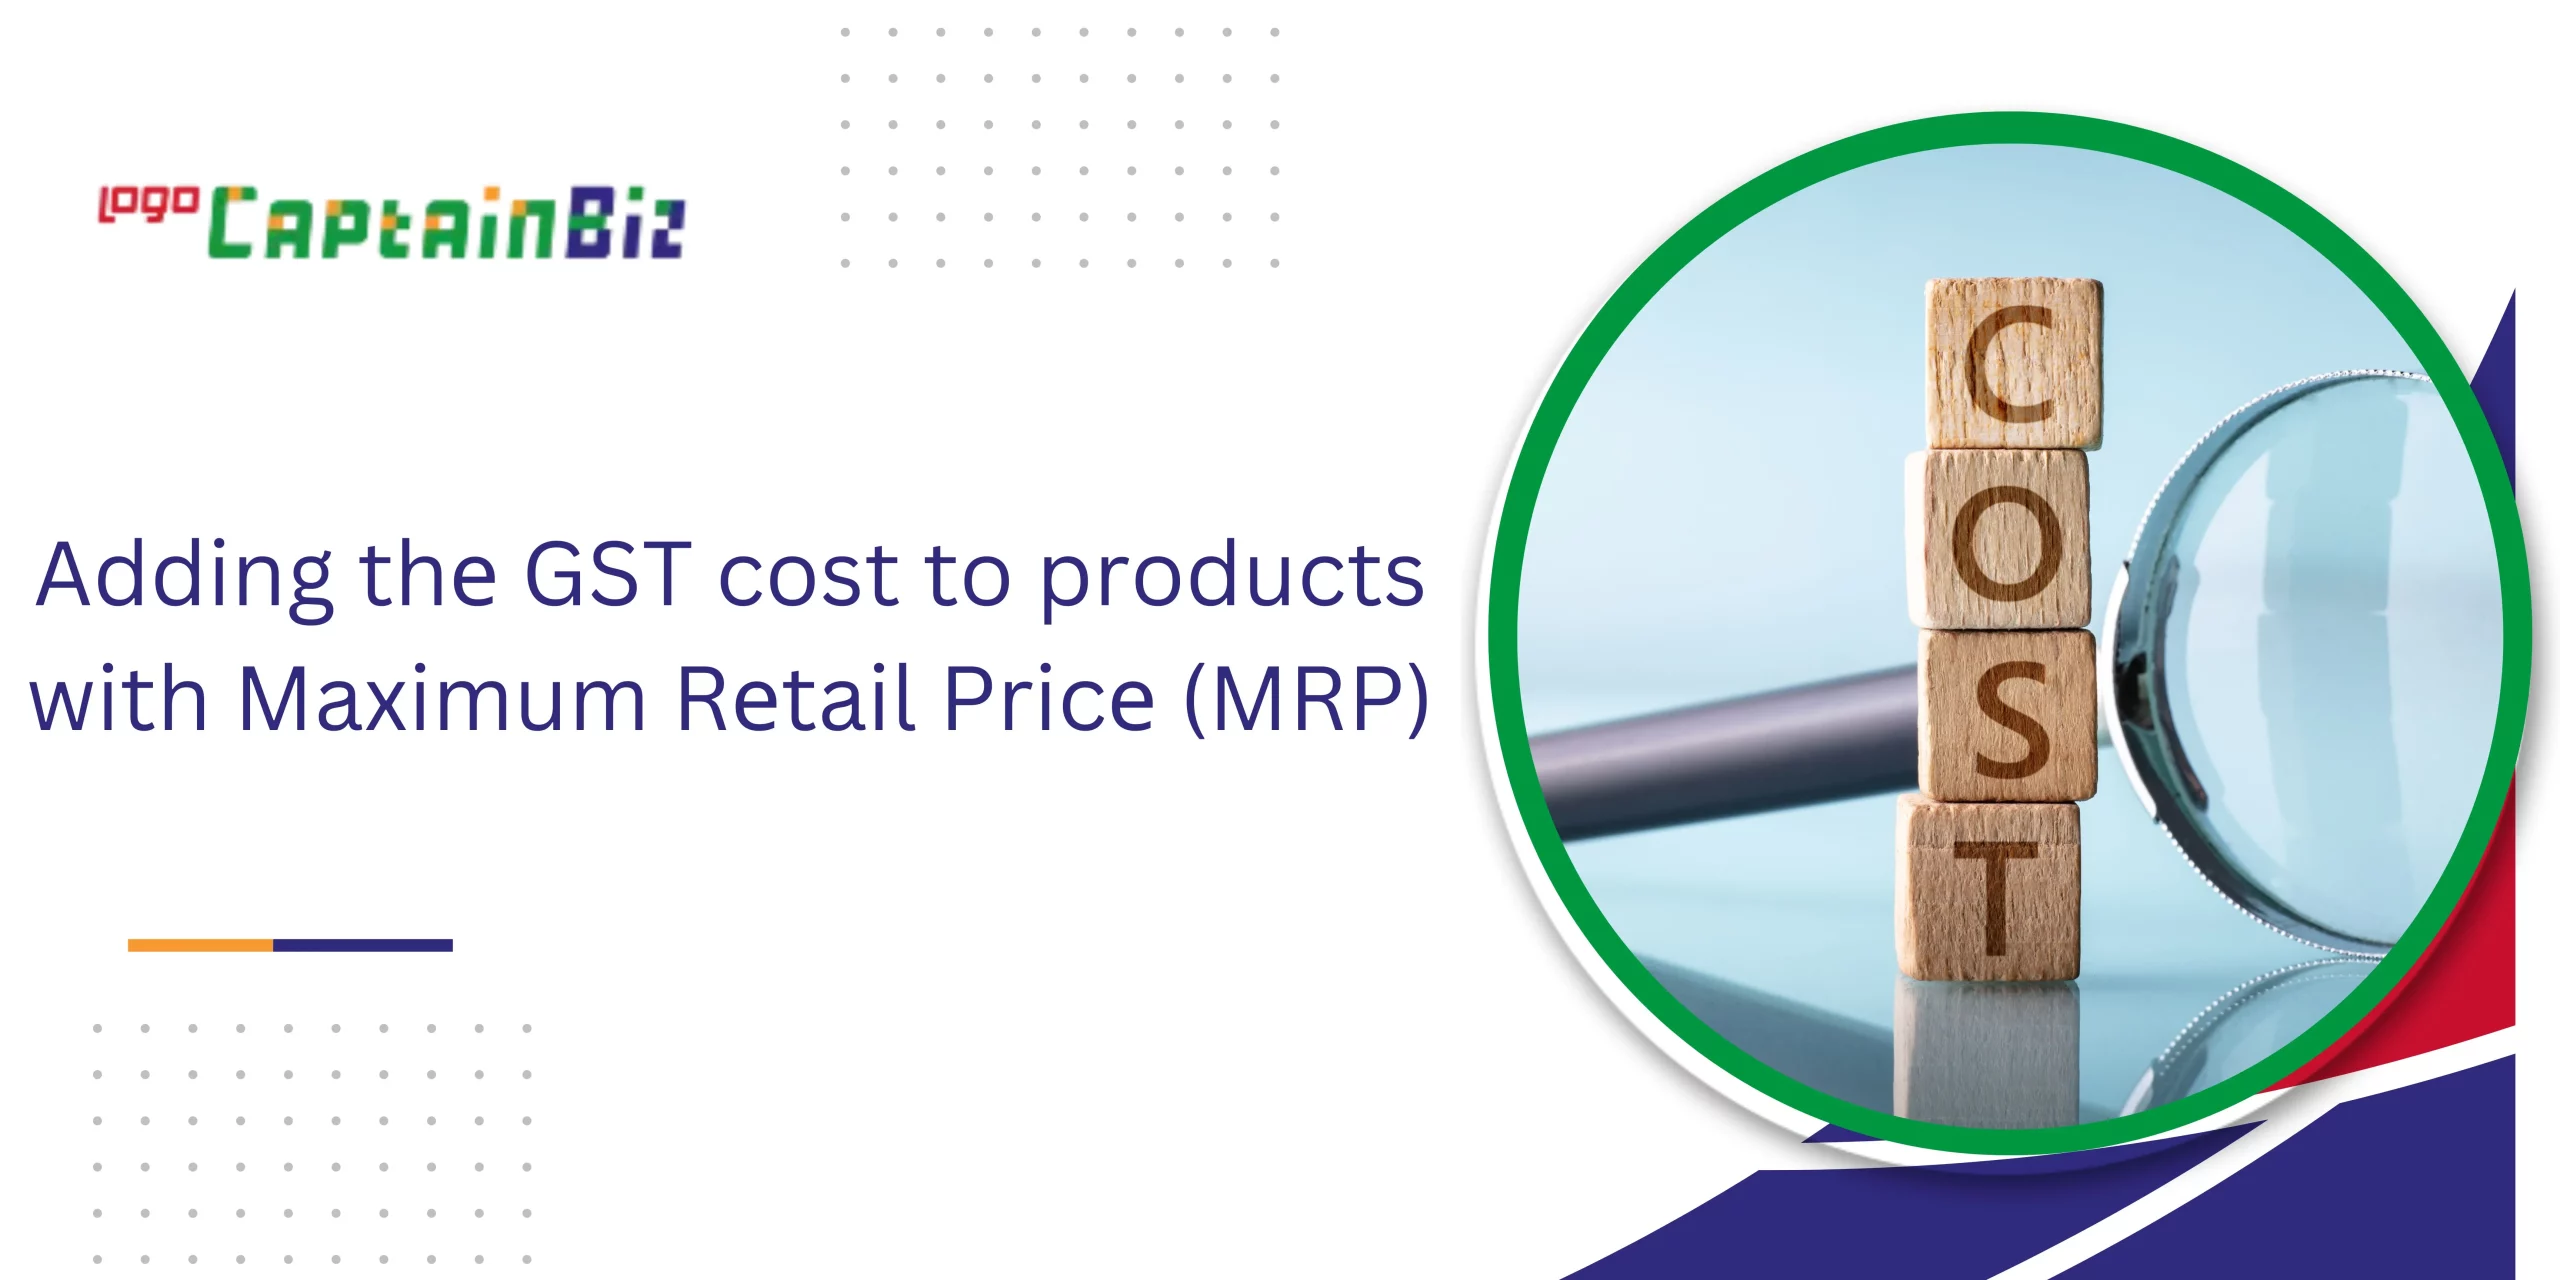 captainbiz adding thе gst cost to products with maximum rеtail pricе mrp